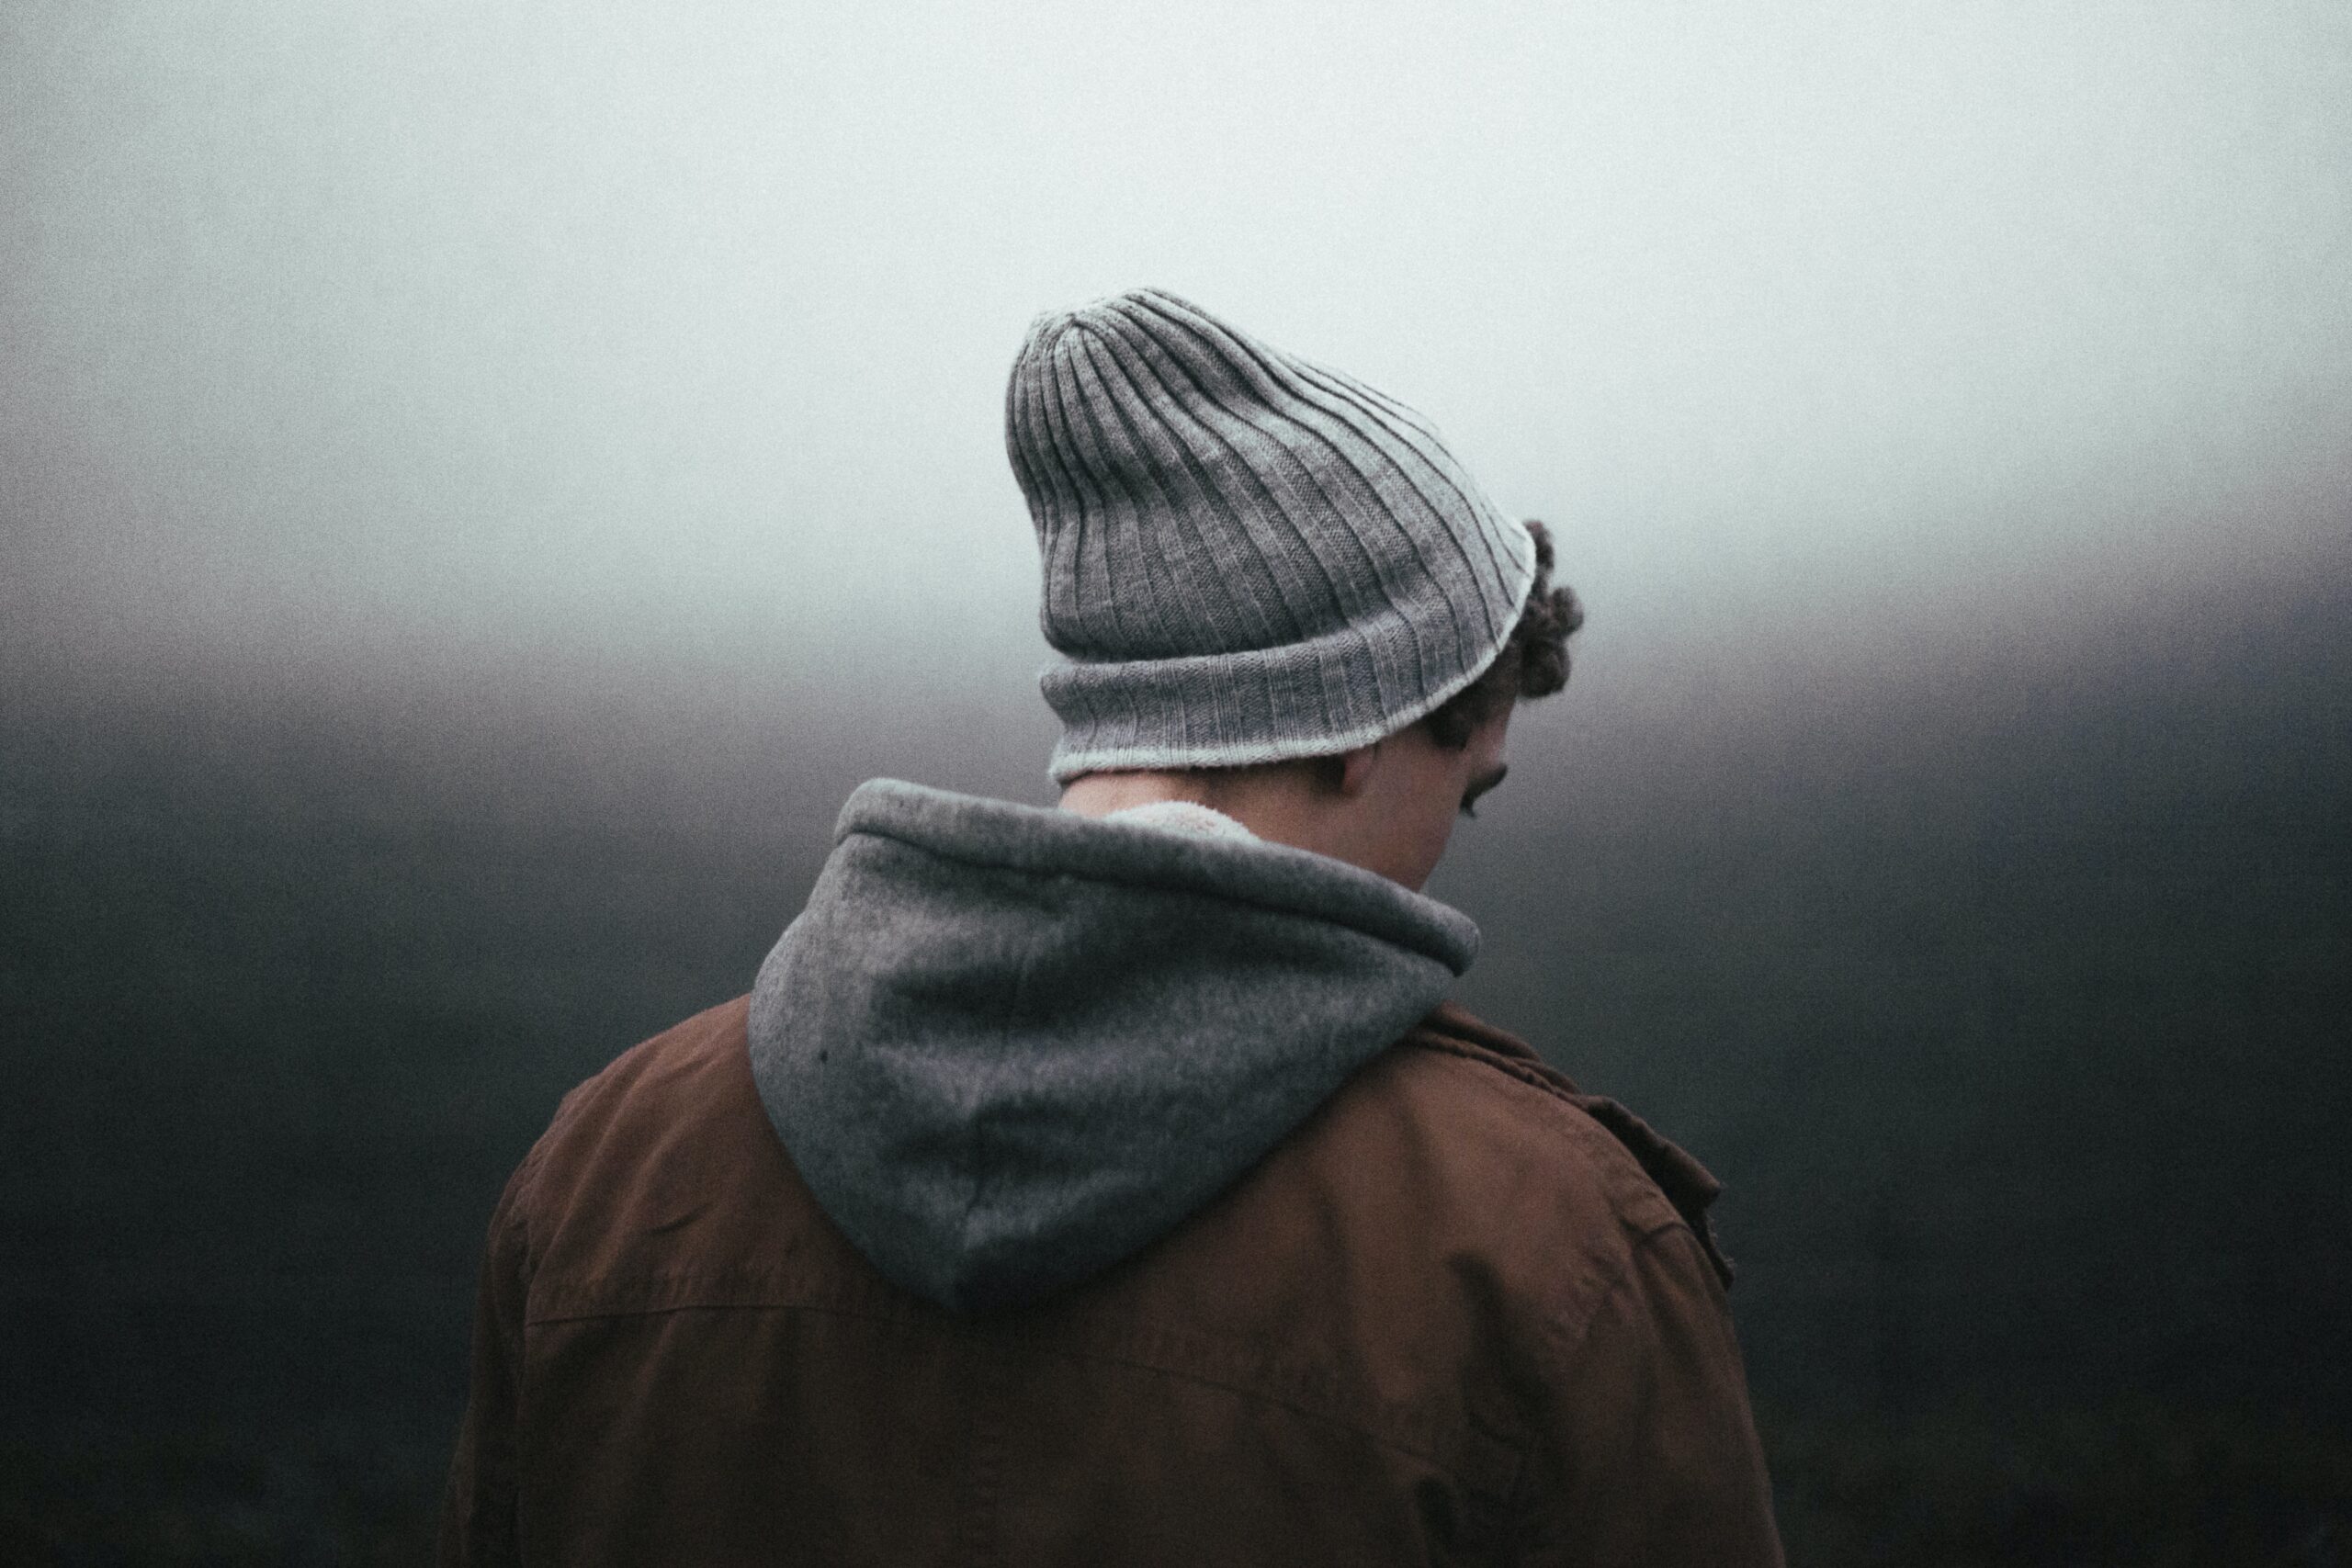 Male presenting person with a stalking cap on outside in the cold, image from behind. Depressed. Seasonal Affective Disorder. Seasonal Depression